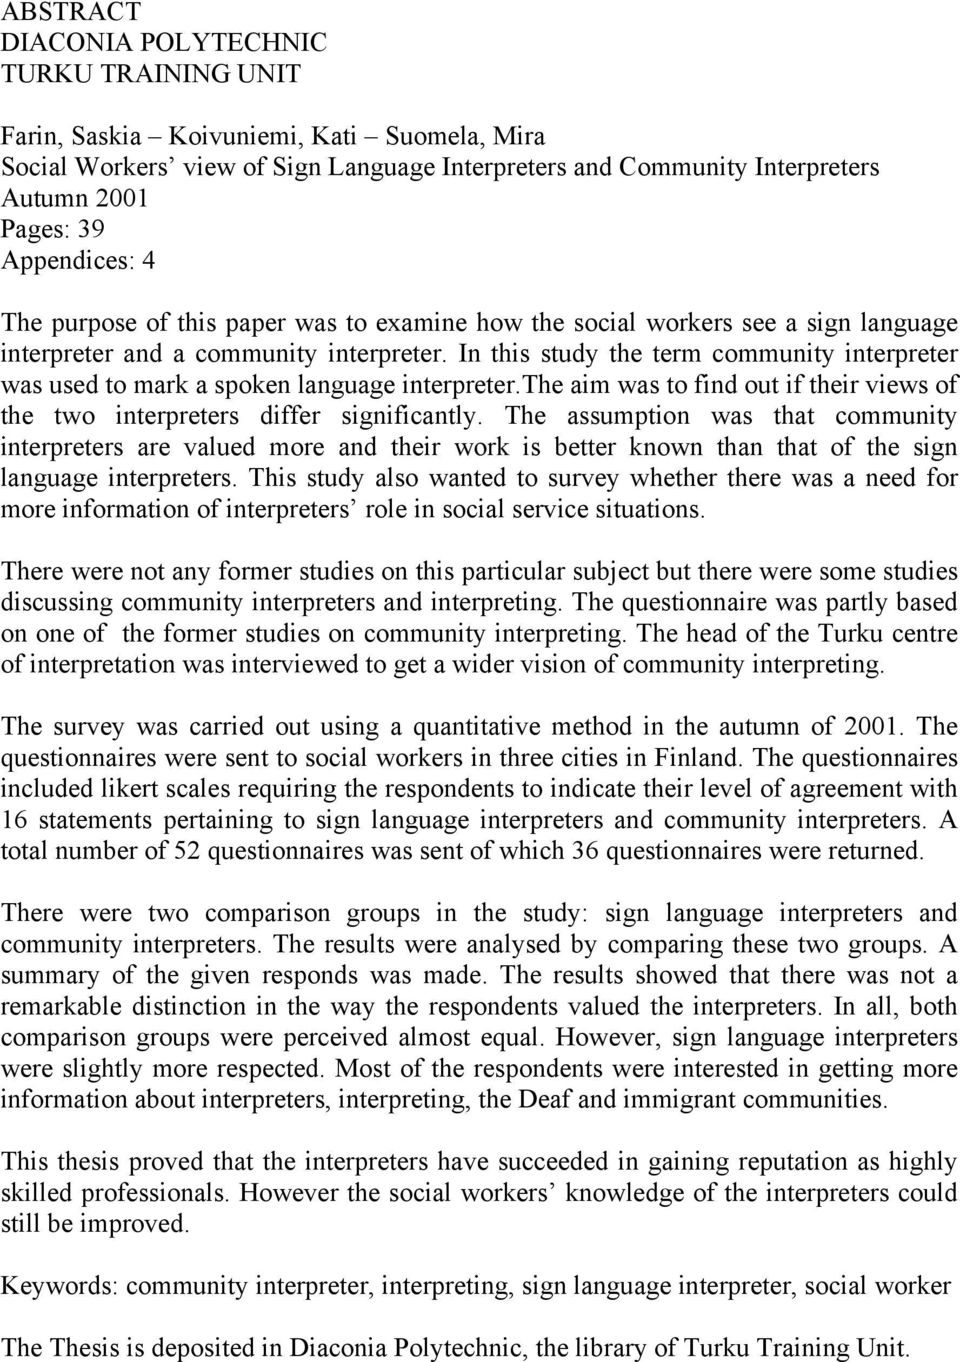 In this study the term community interpreter was used to mark a spoken language interpreter.the aim was to find out if their views of the two interpreters differ significantly.